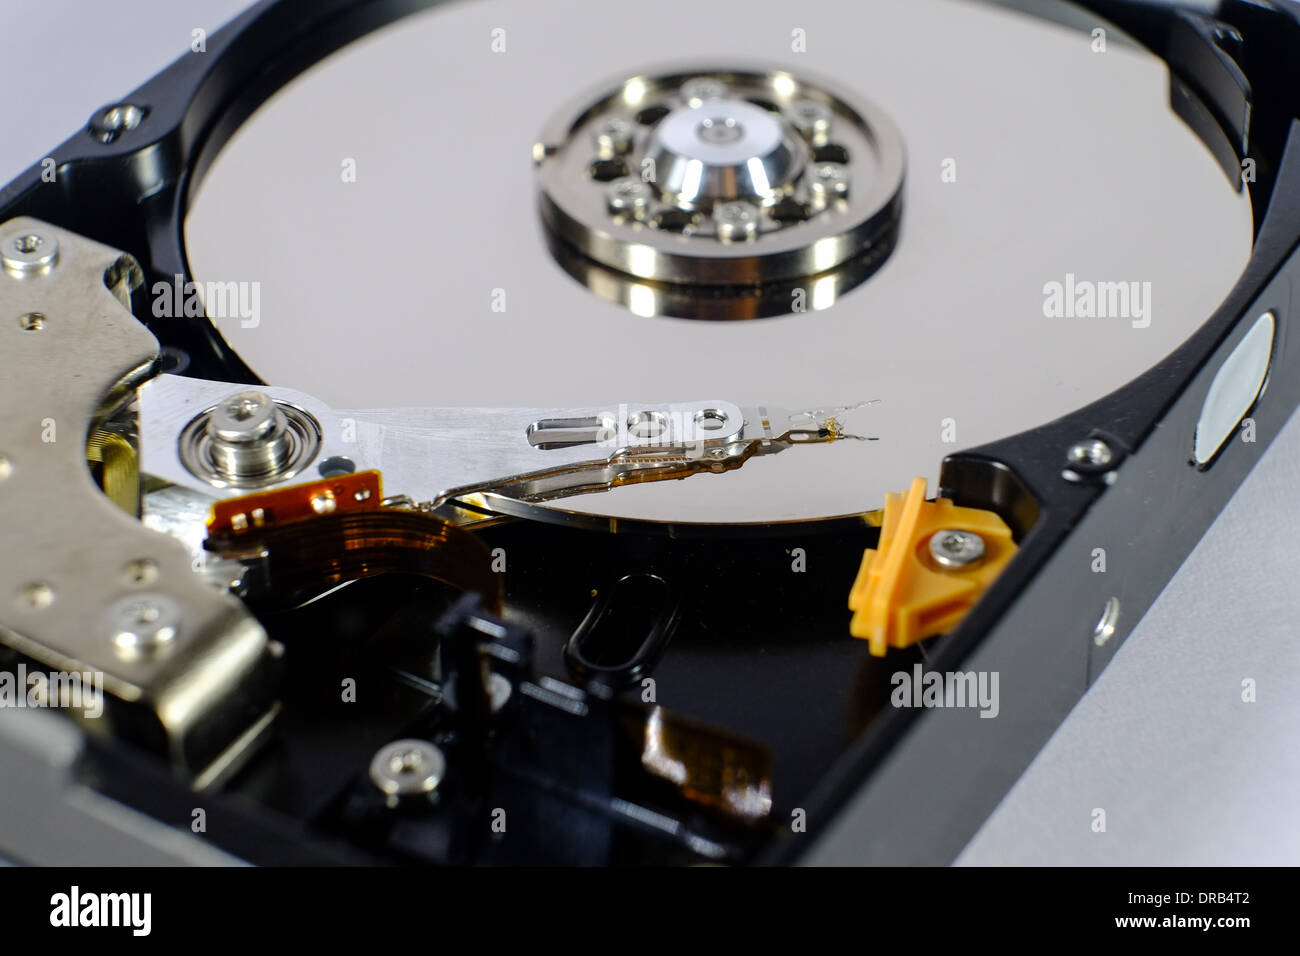 opened hard disk drive shows the disc and the read and write head. focus on the read and write head Stock Photo